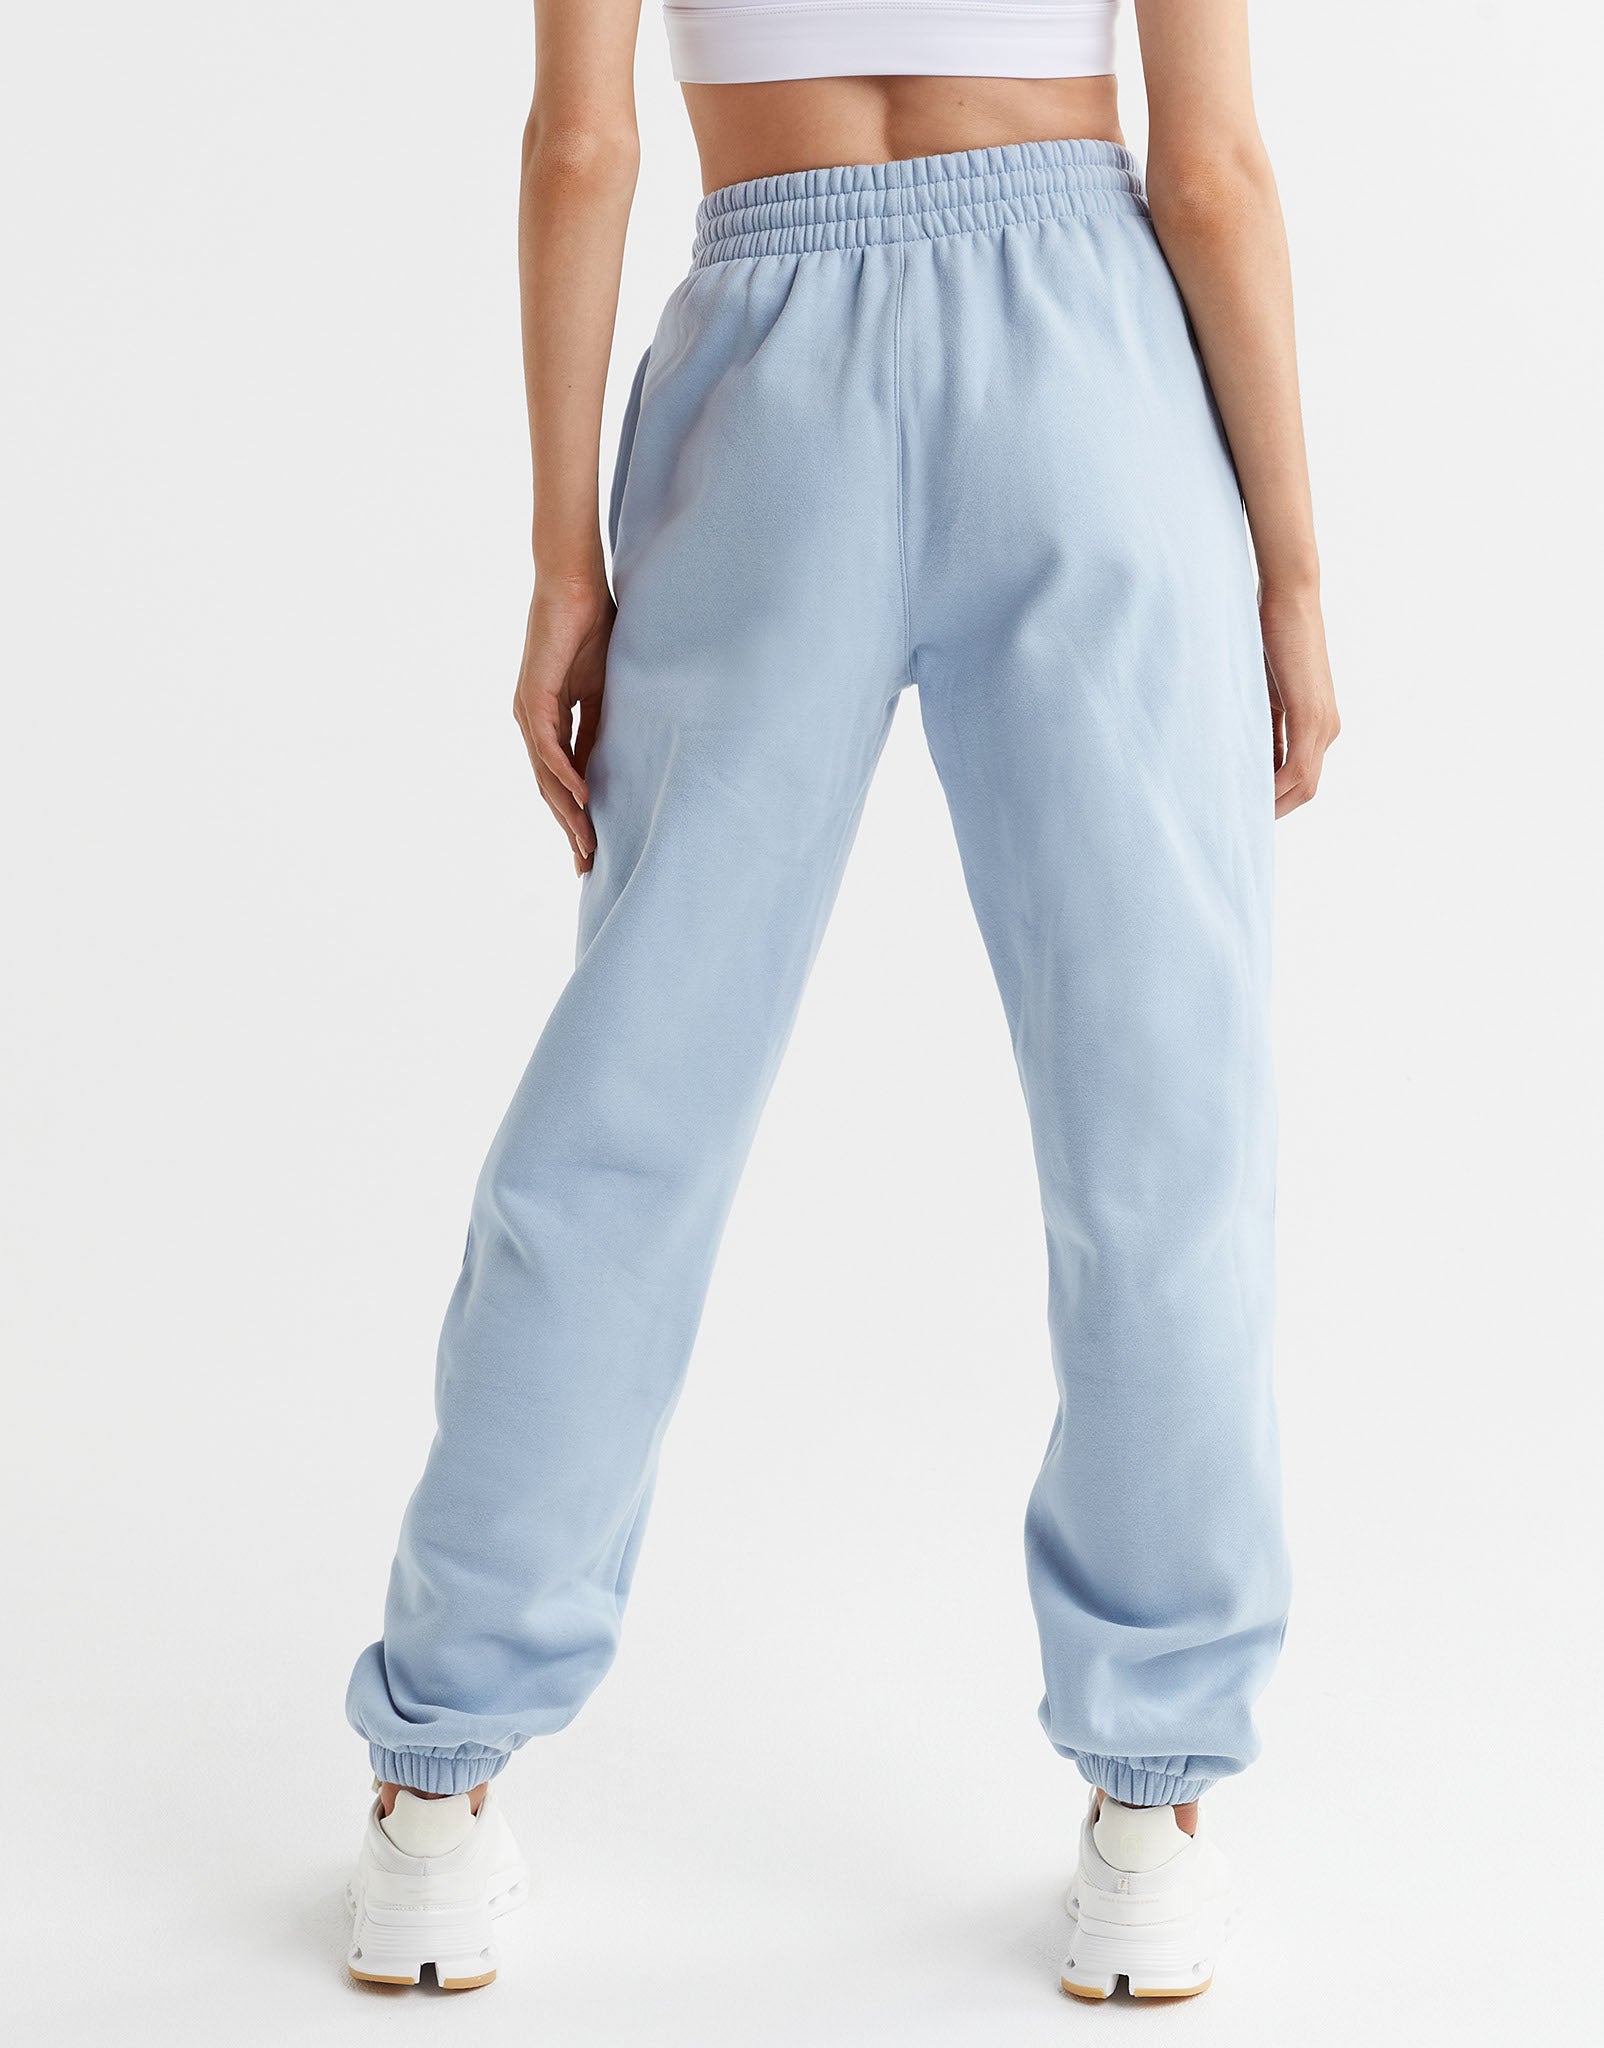 Lilybod-Lucy-Oversized-Fleece-Track-Pant-Cloud-LL89-CLD-4-New.jpeg